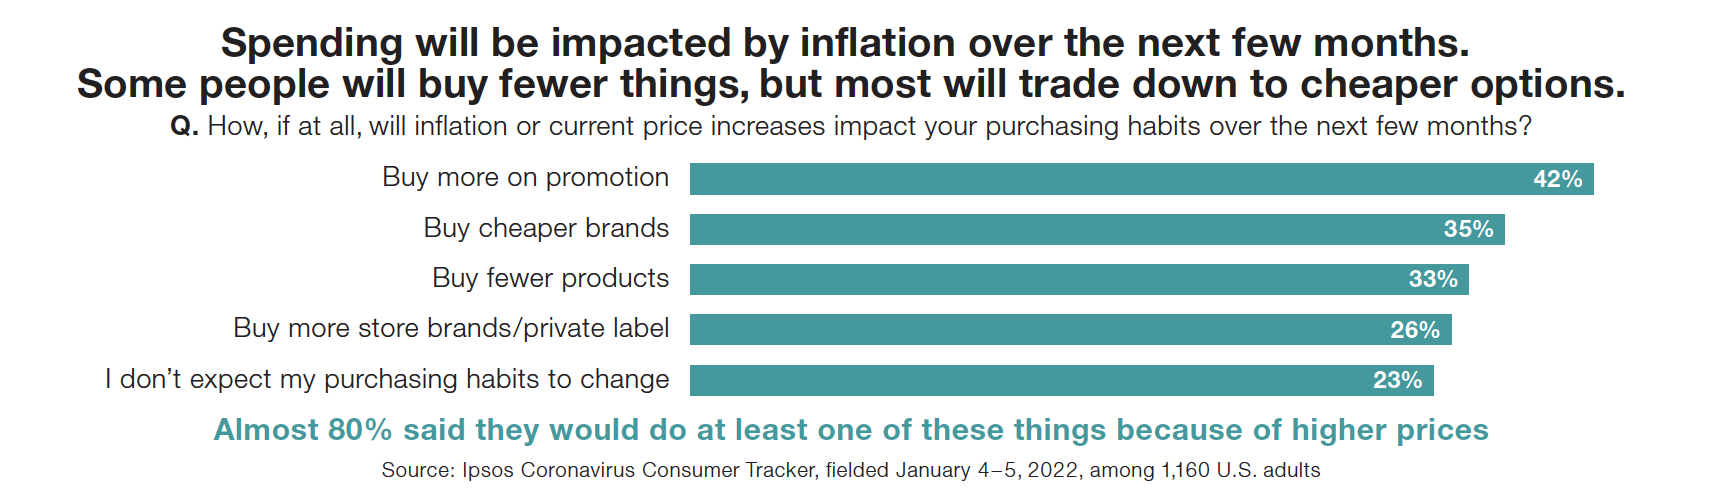 Spending will be impacted by inflation over the next few months. Some people will buy fewer things, but most will trade down to cheaper options.